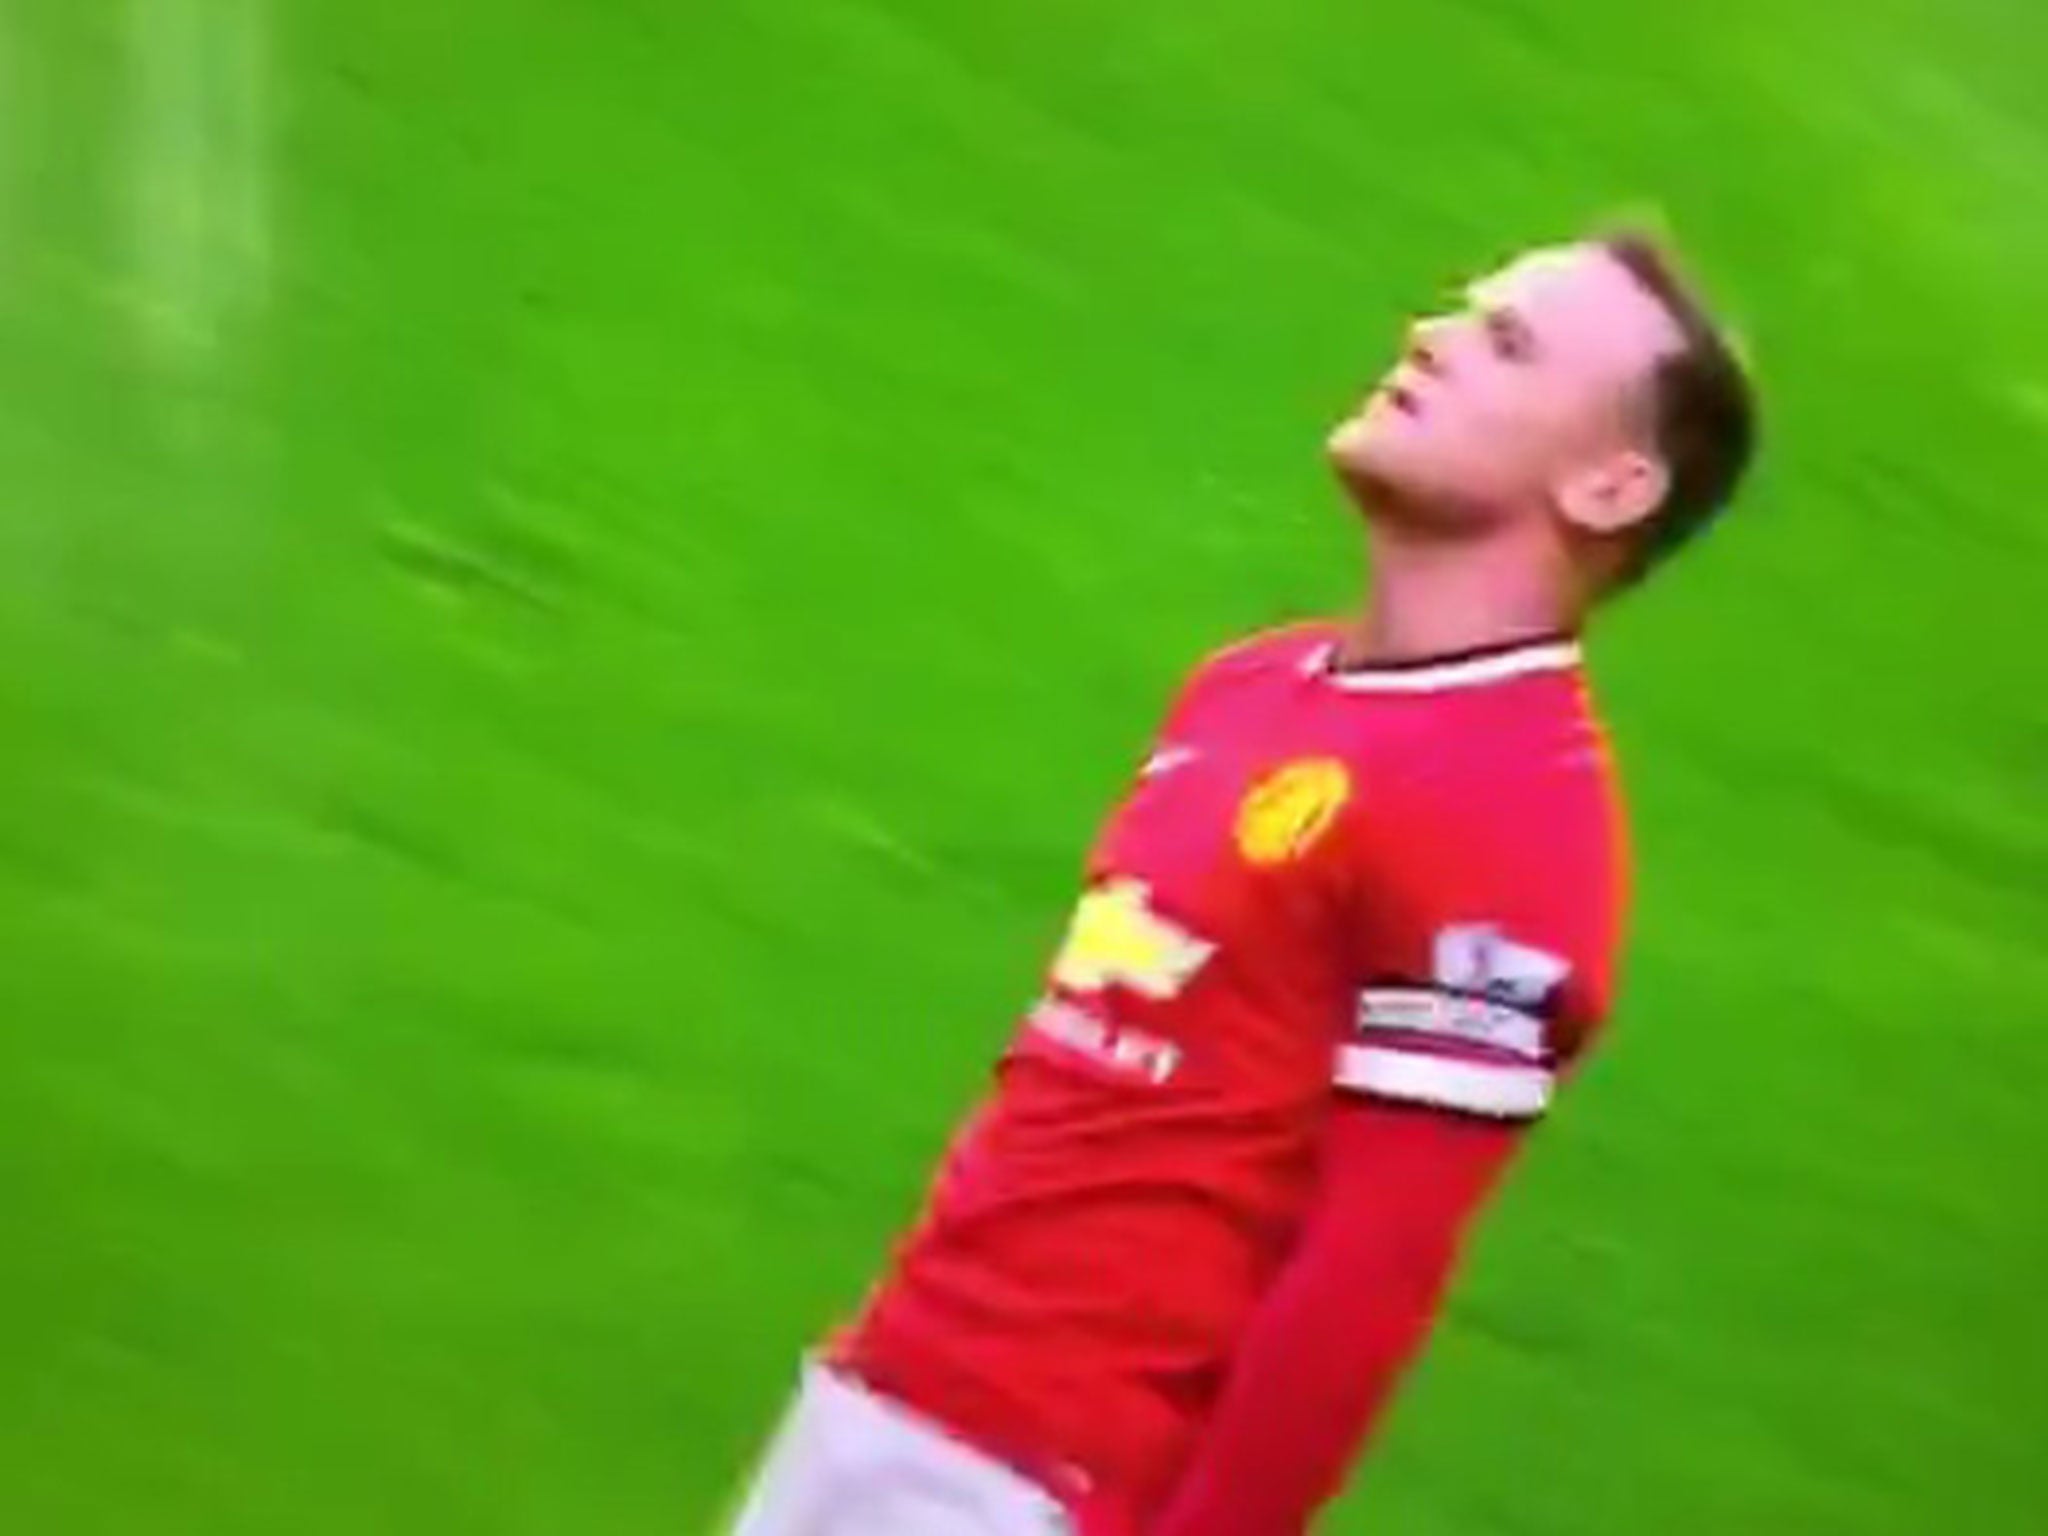 Rooney's 'knock-out' celebration